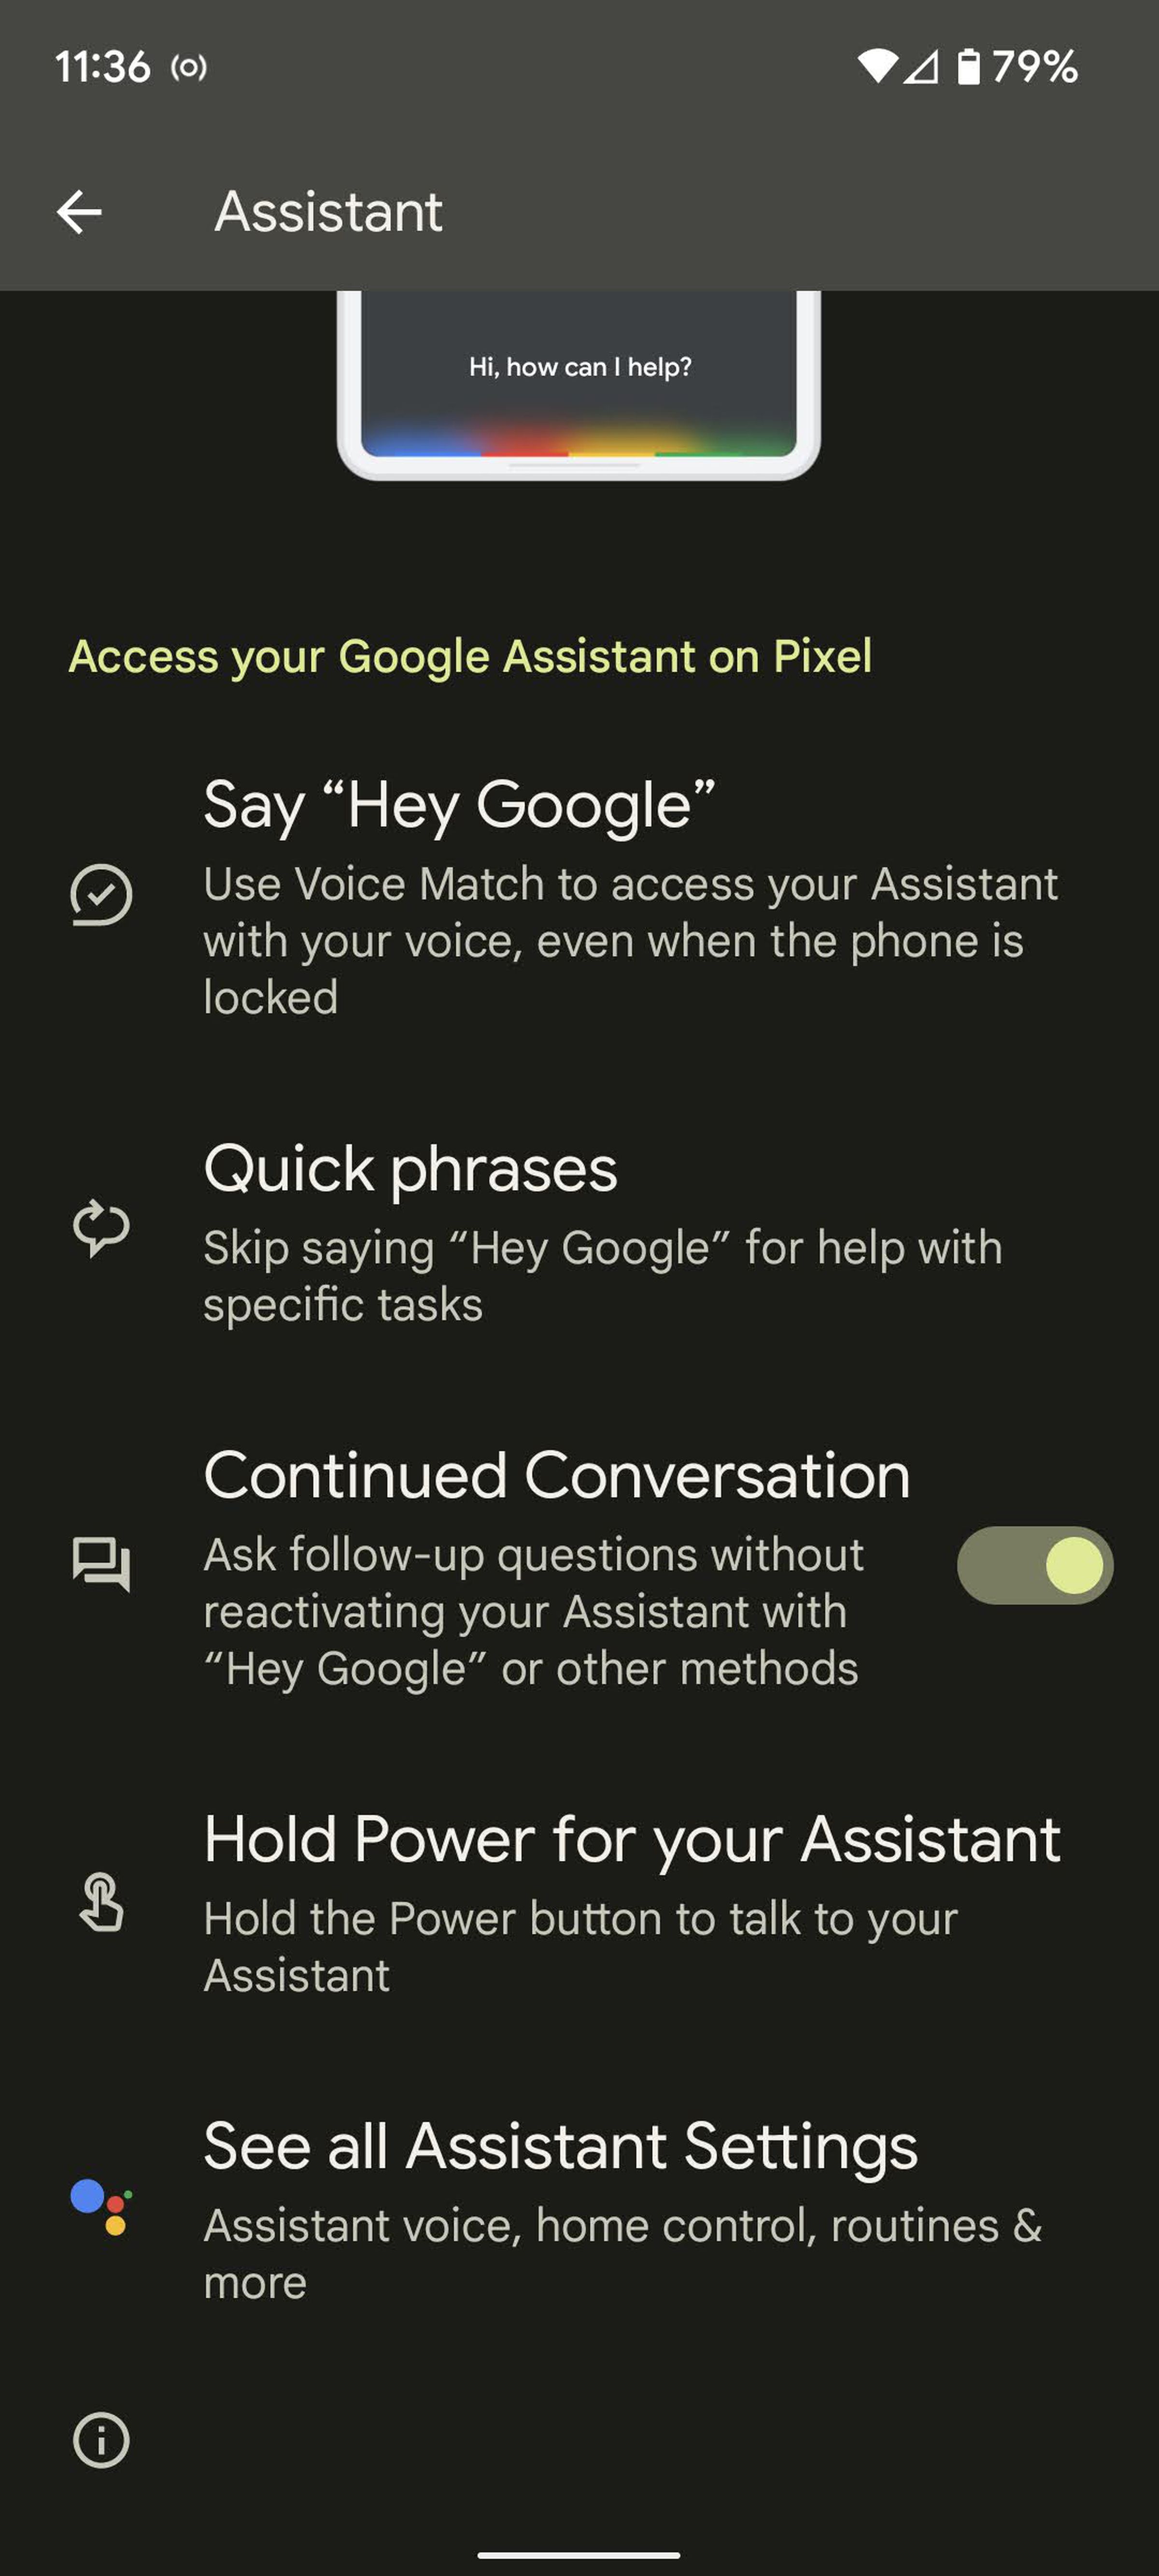 In your Assistant settings, select See all Assistant Settings